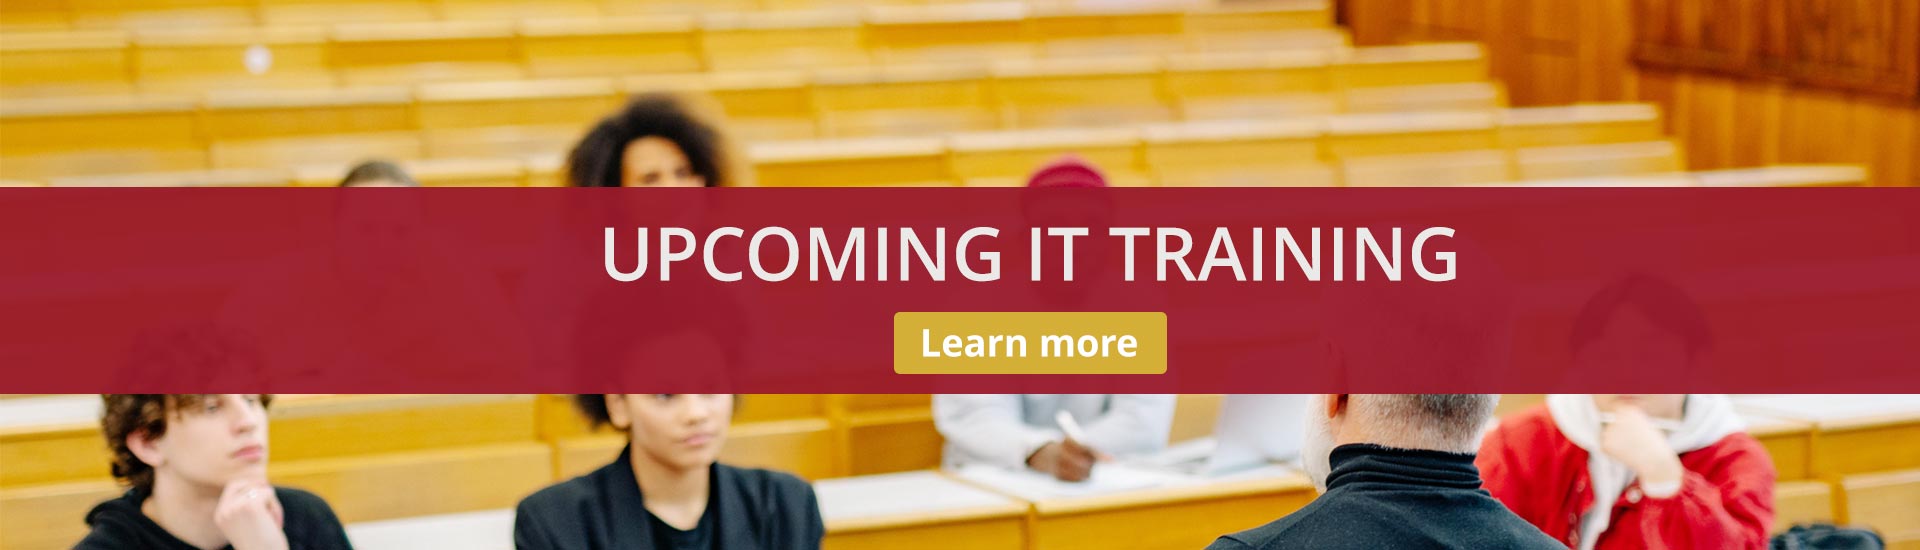 Upcoming IT Training sessions